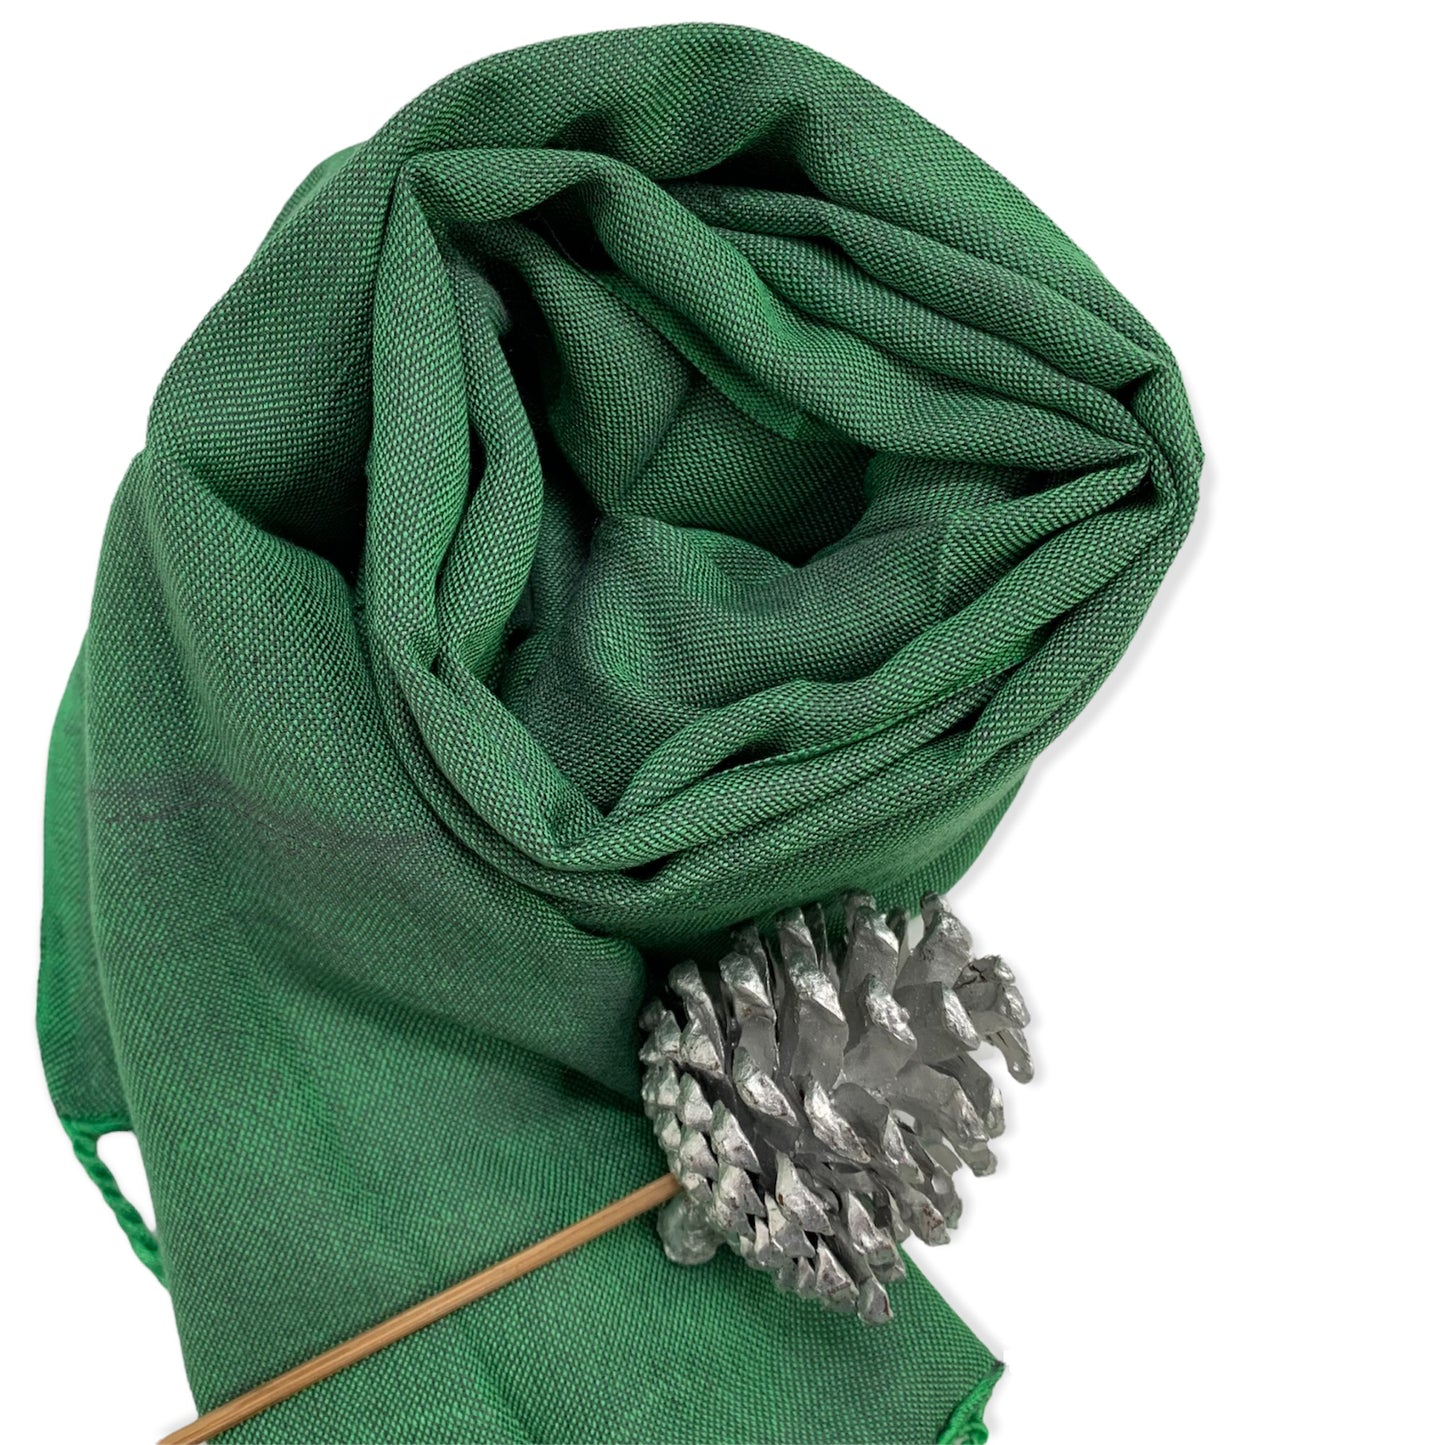 Small Solid Handwoven Scarf - Green & Gray